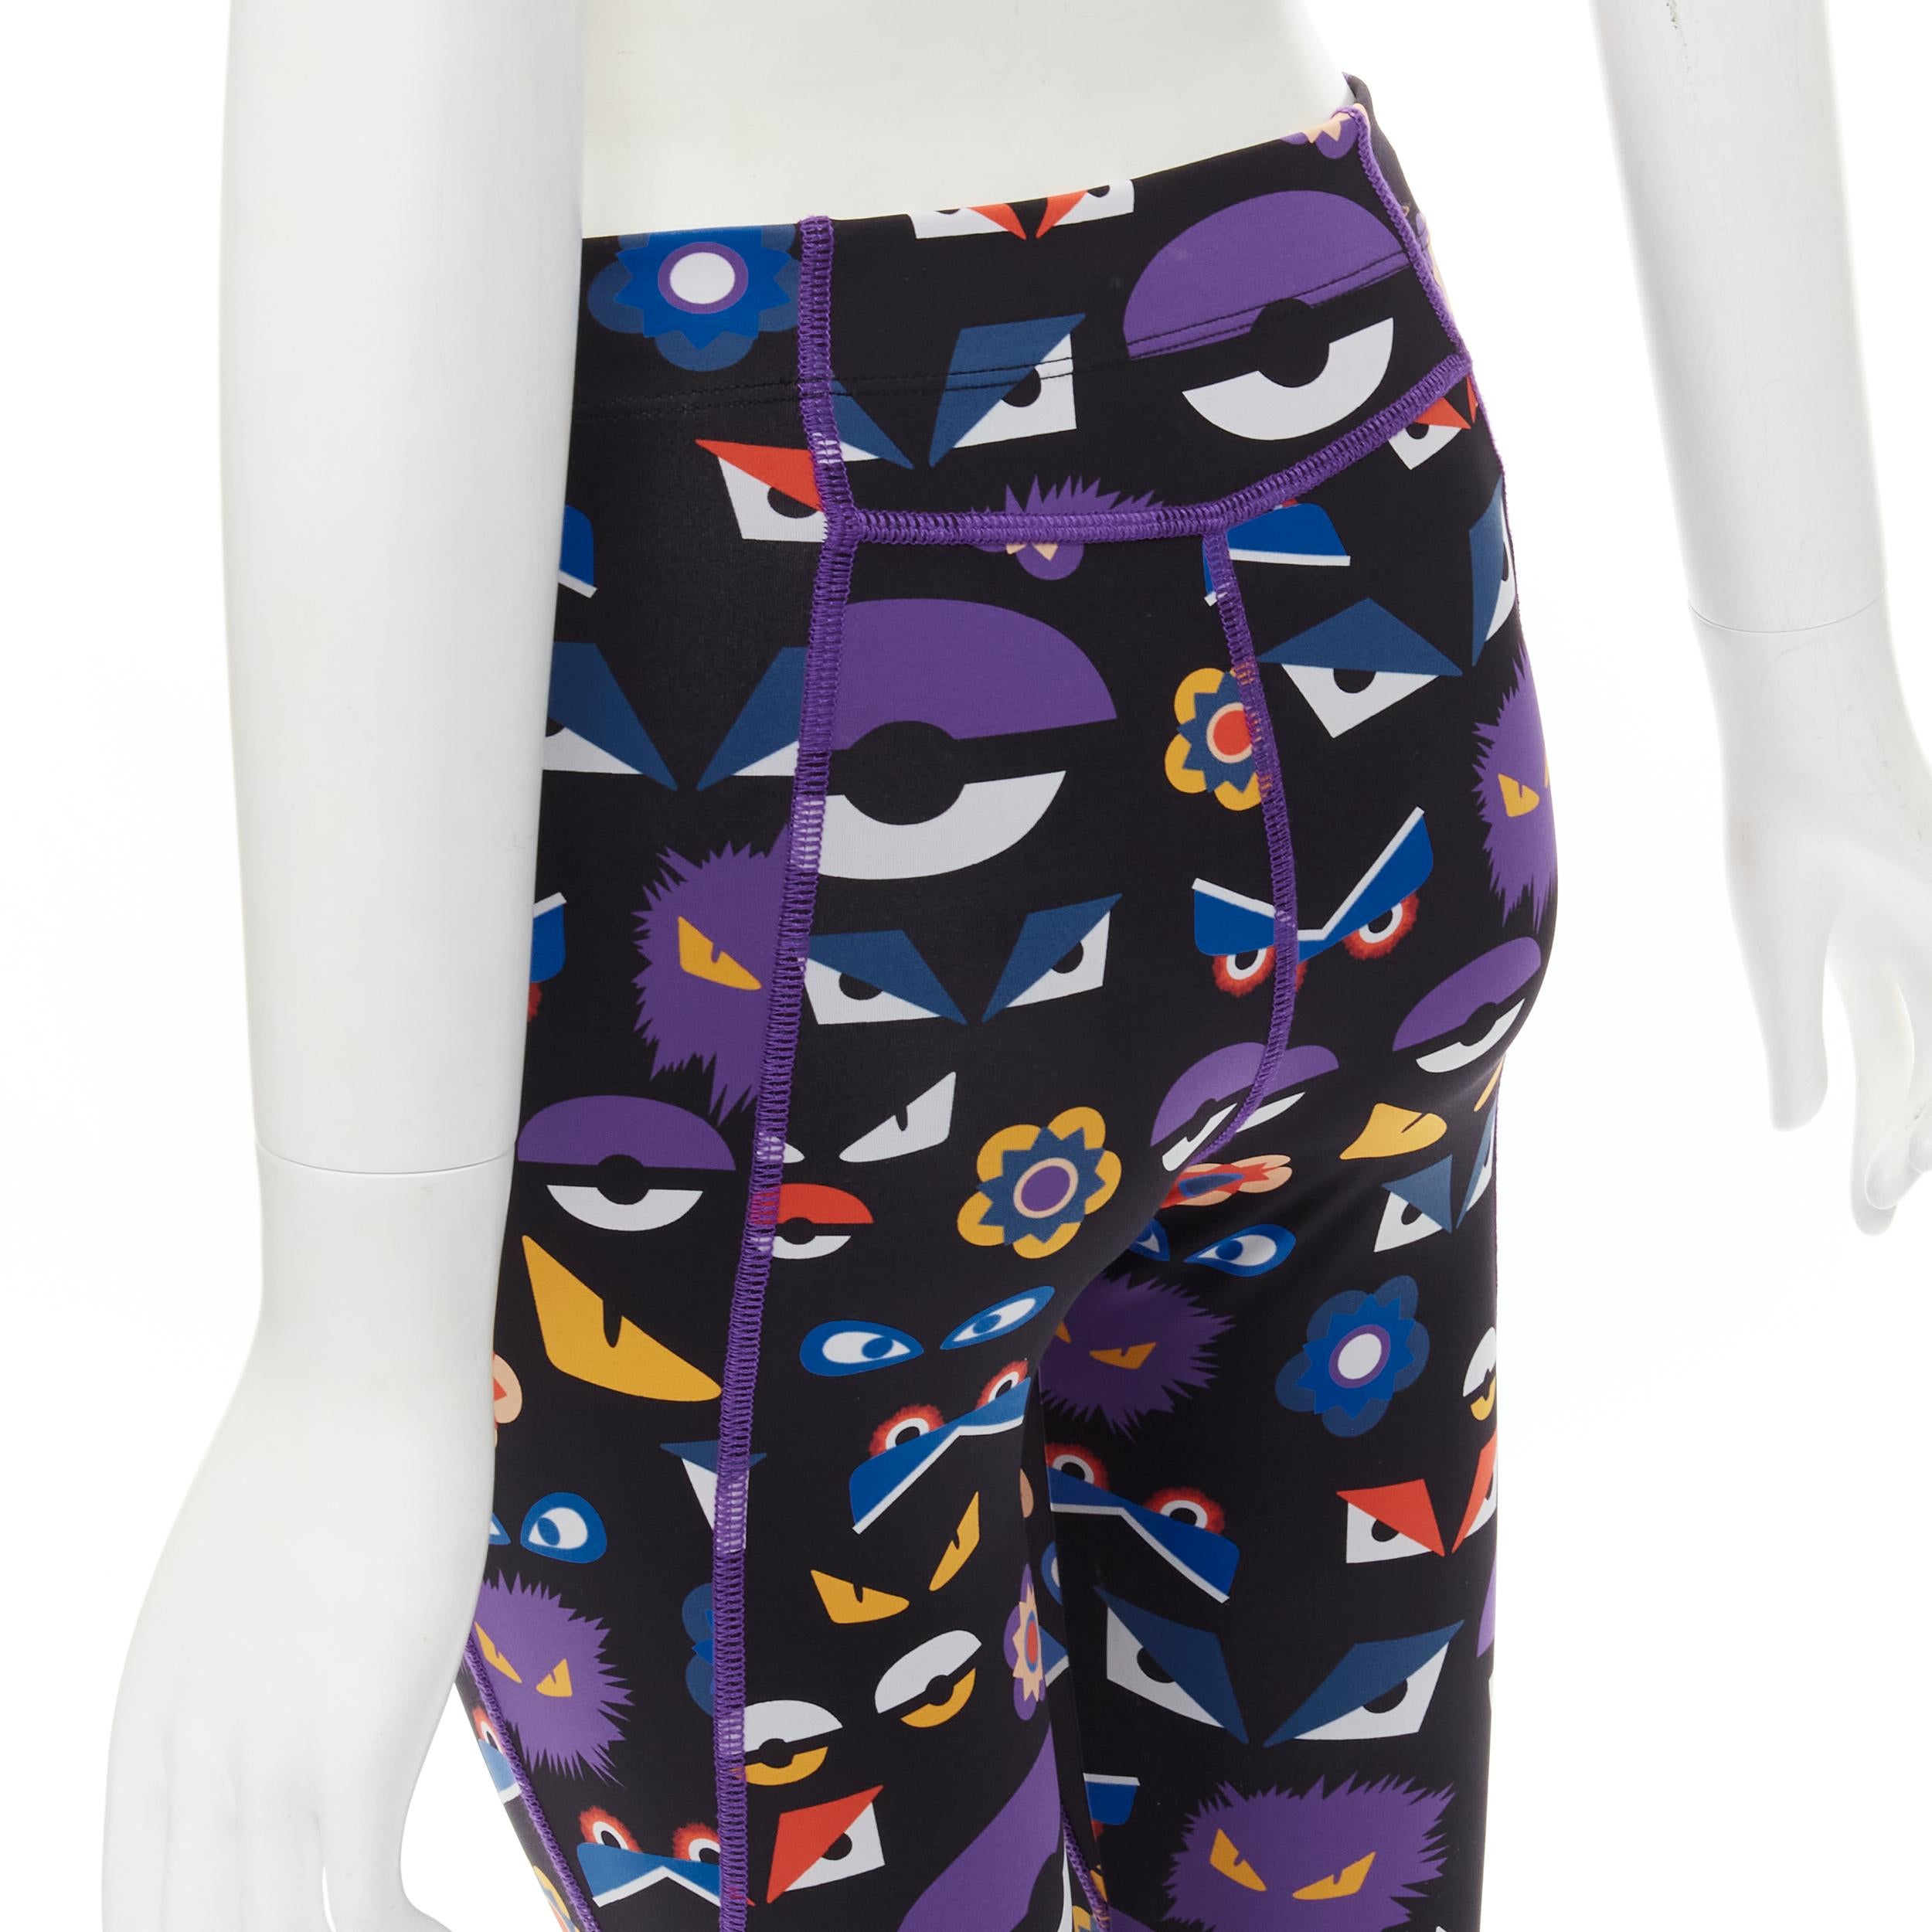 FNEDI Monster Bug Eye black graphic print Activewear leggings
Brand: Fendi
Collection: Monster Bug 
Material: Feels like cotton
Color: Black
Pattern: Graphic
Extra Detail: Single front pocket with Fendi logo elastic trim

CONDITION:
Condition: